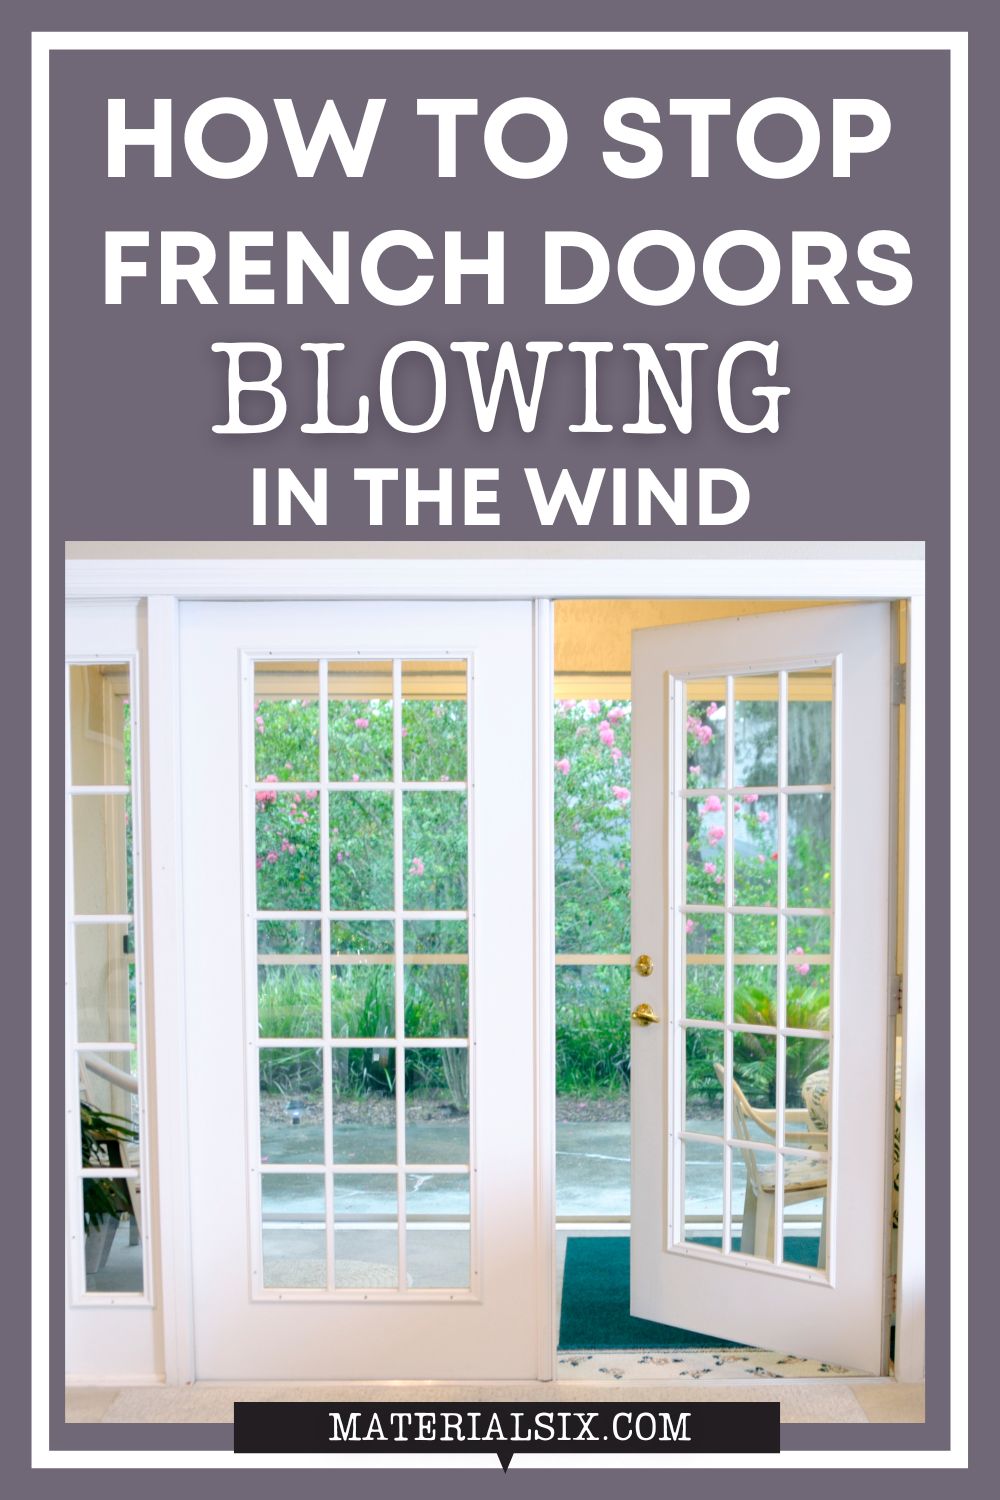 How to Stop French Doors Blowing In The Wind